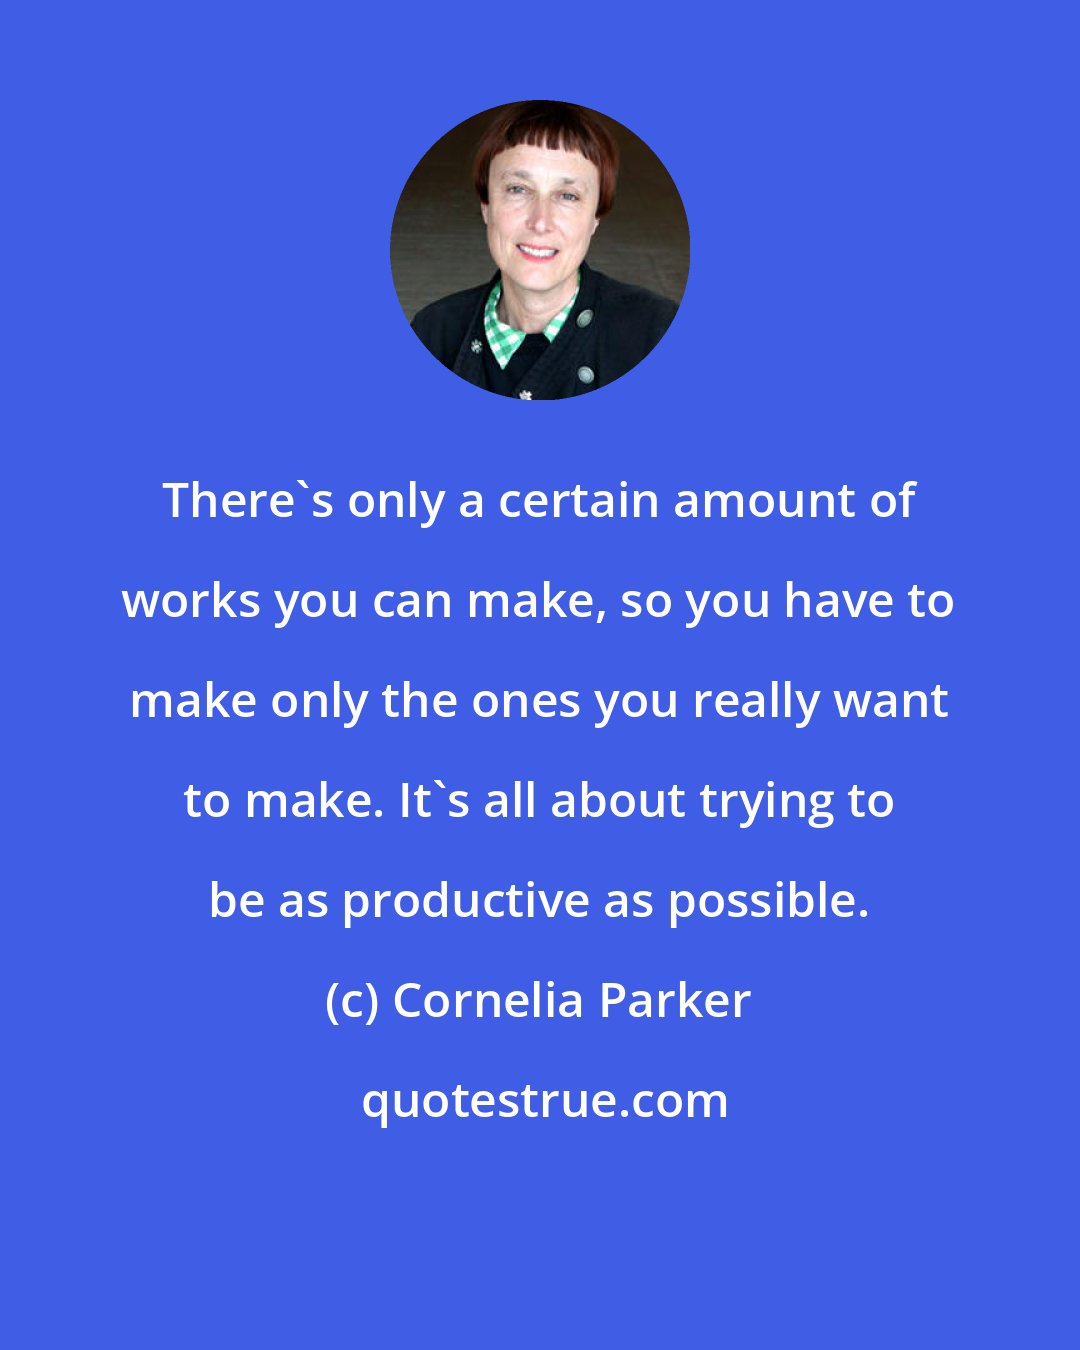 Cornelia Parker: There's only a certain amount of works you can make, so you have to make only the ones you really want to make. It's all about trying to be as productive as possible.